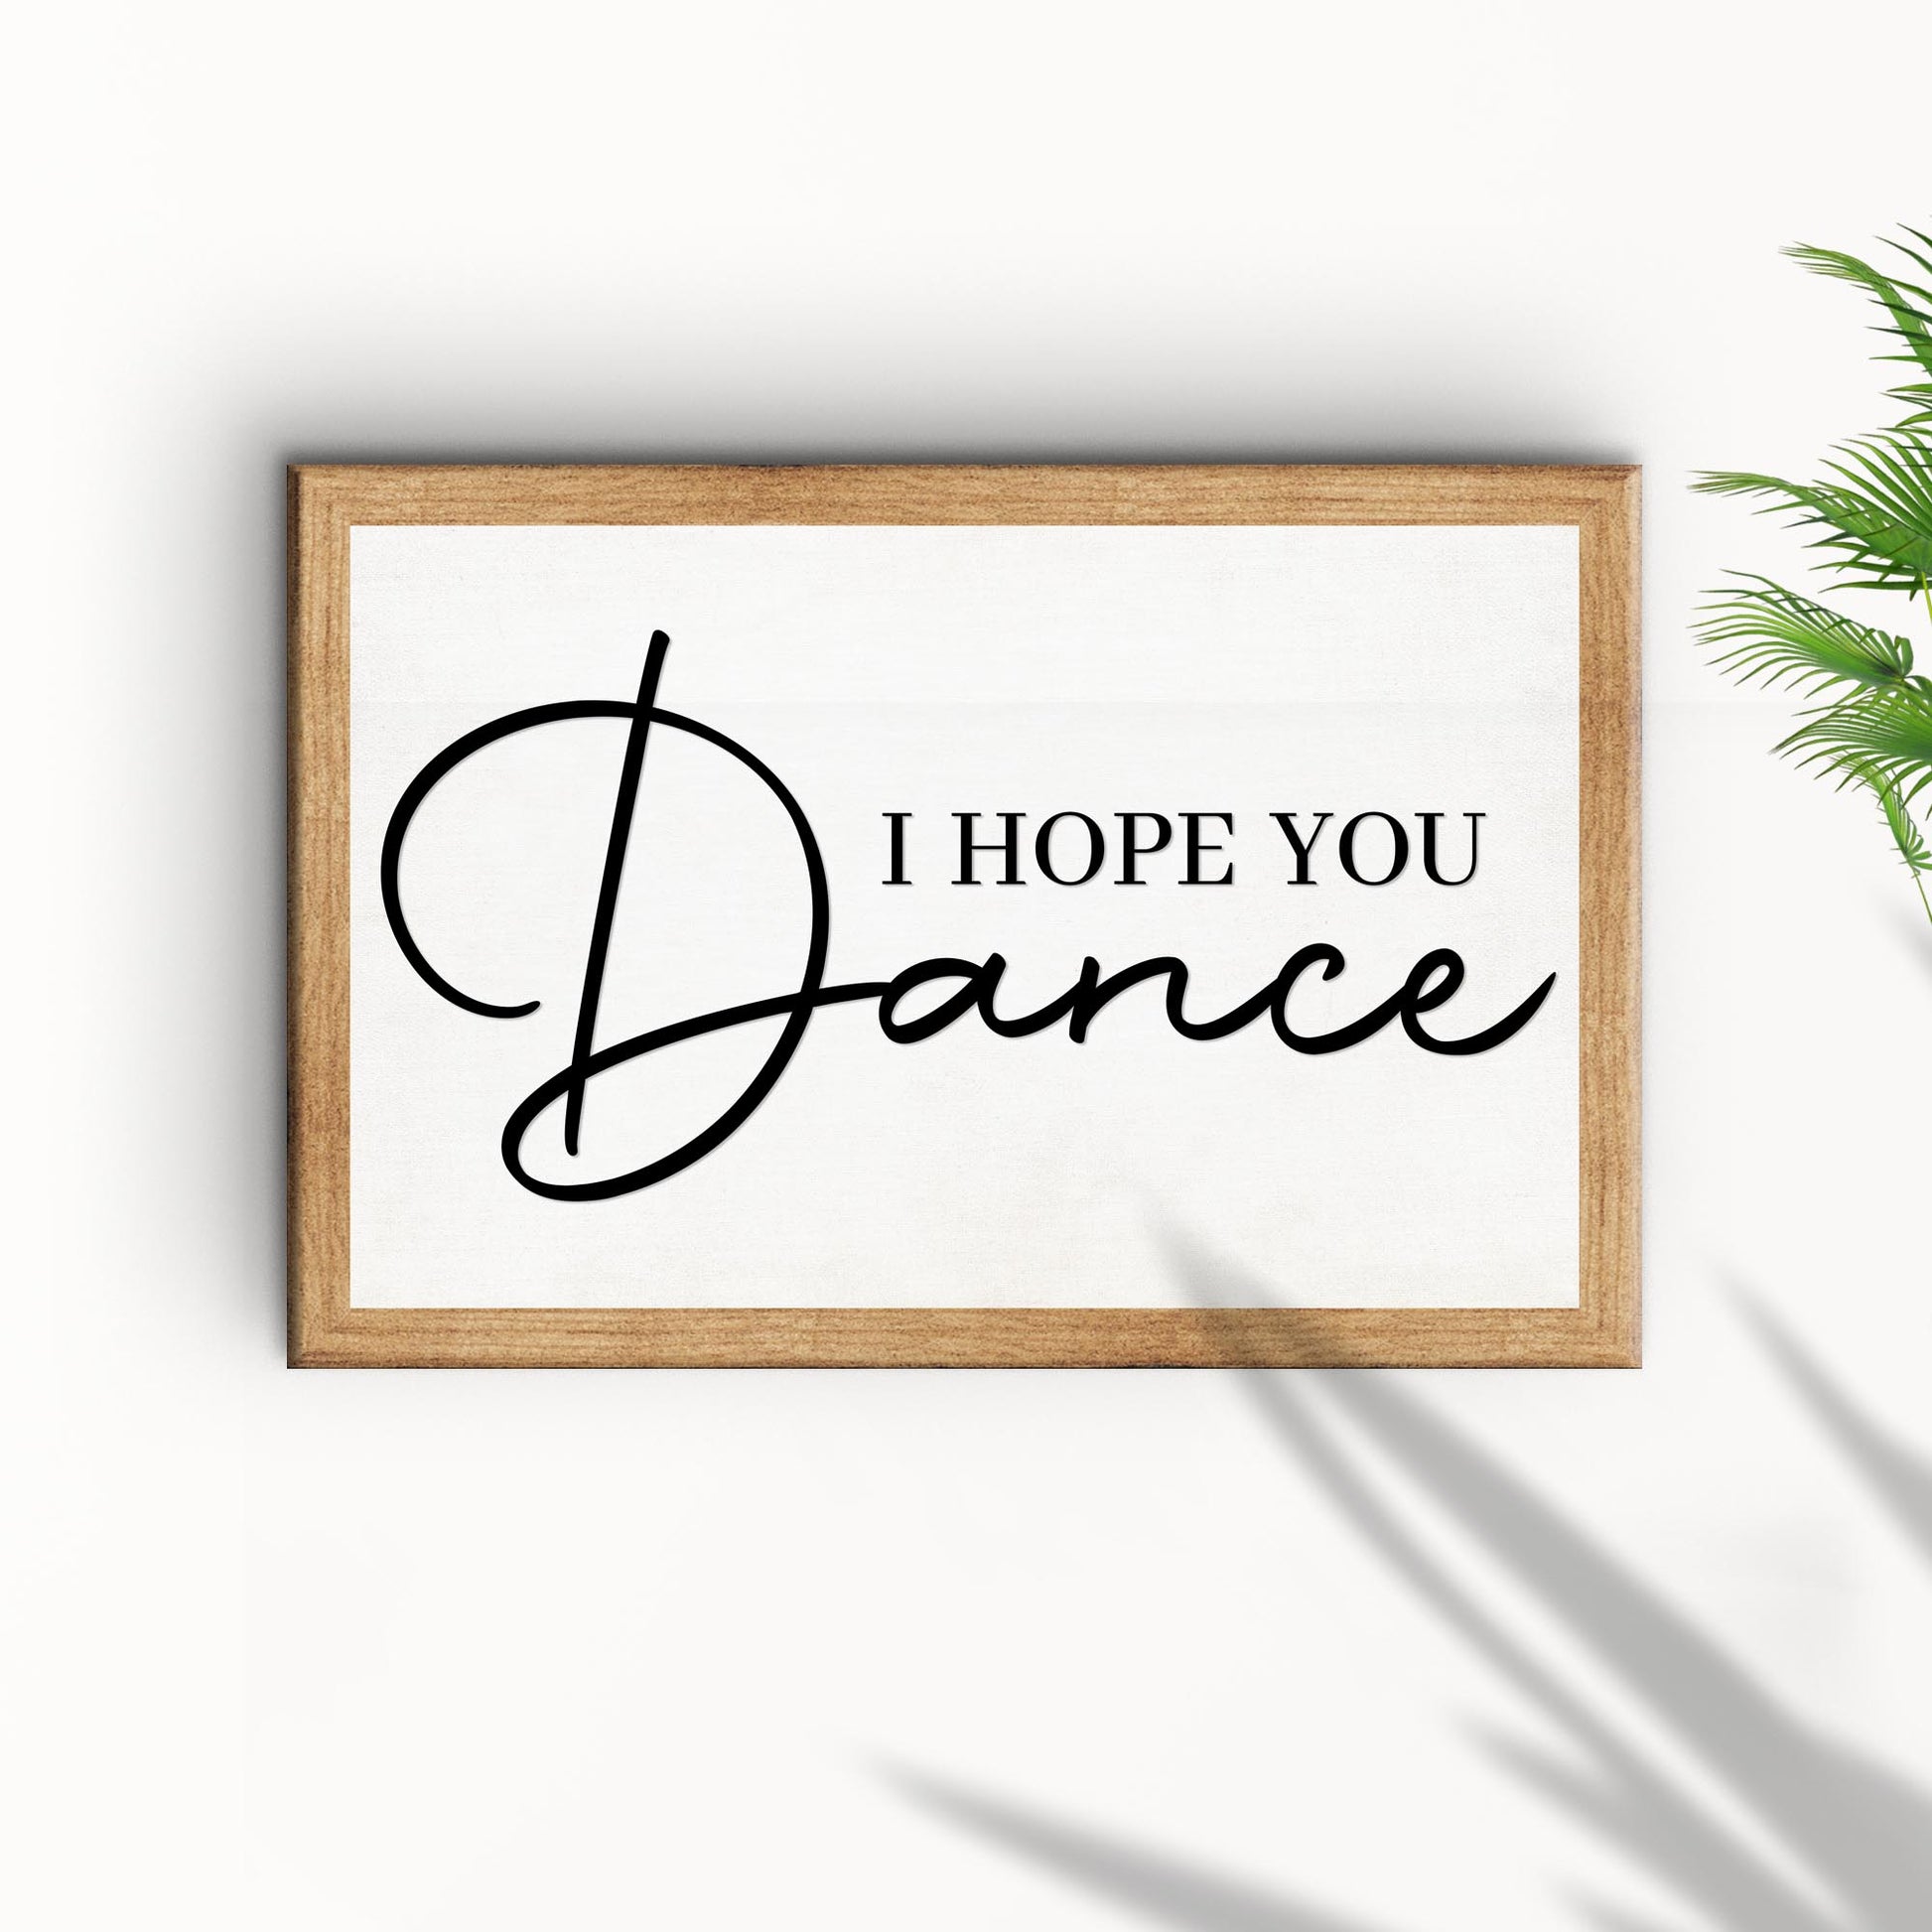 I Hope You Dance Sign - Image by Tailored Canvases